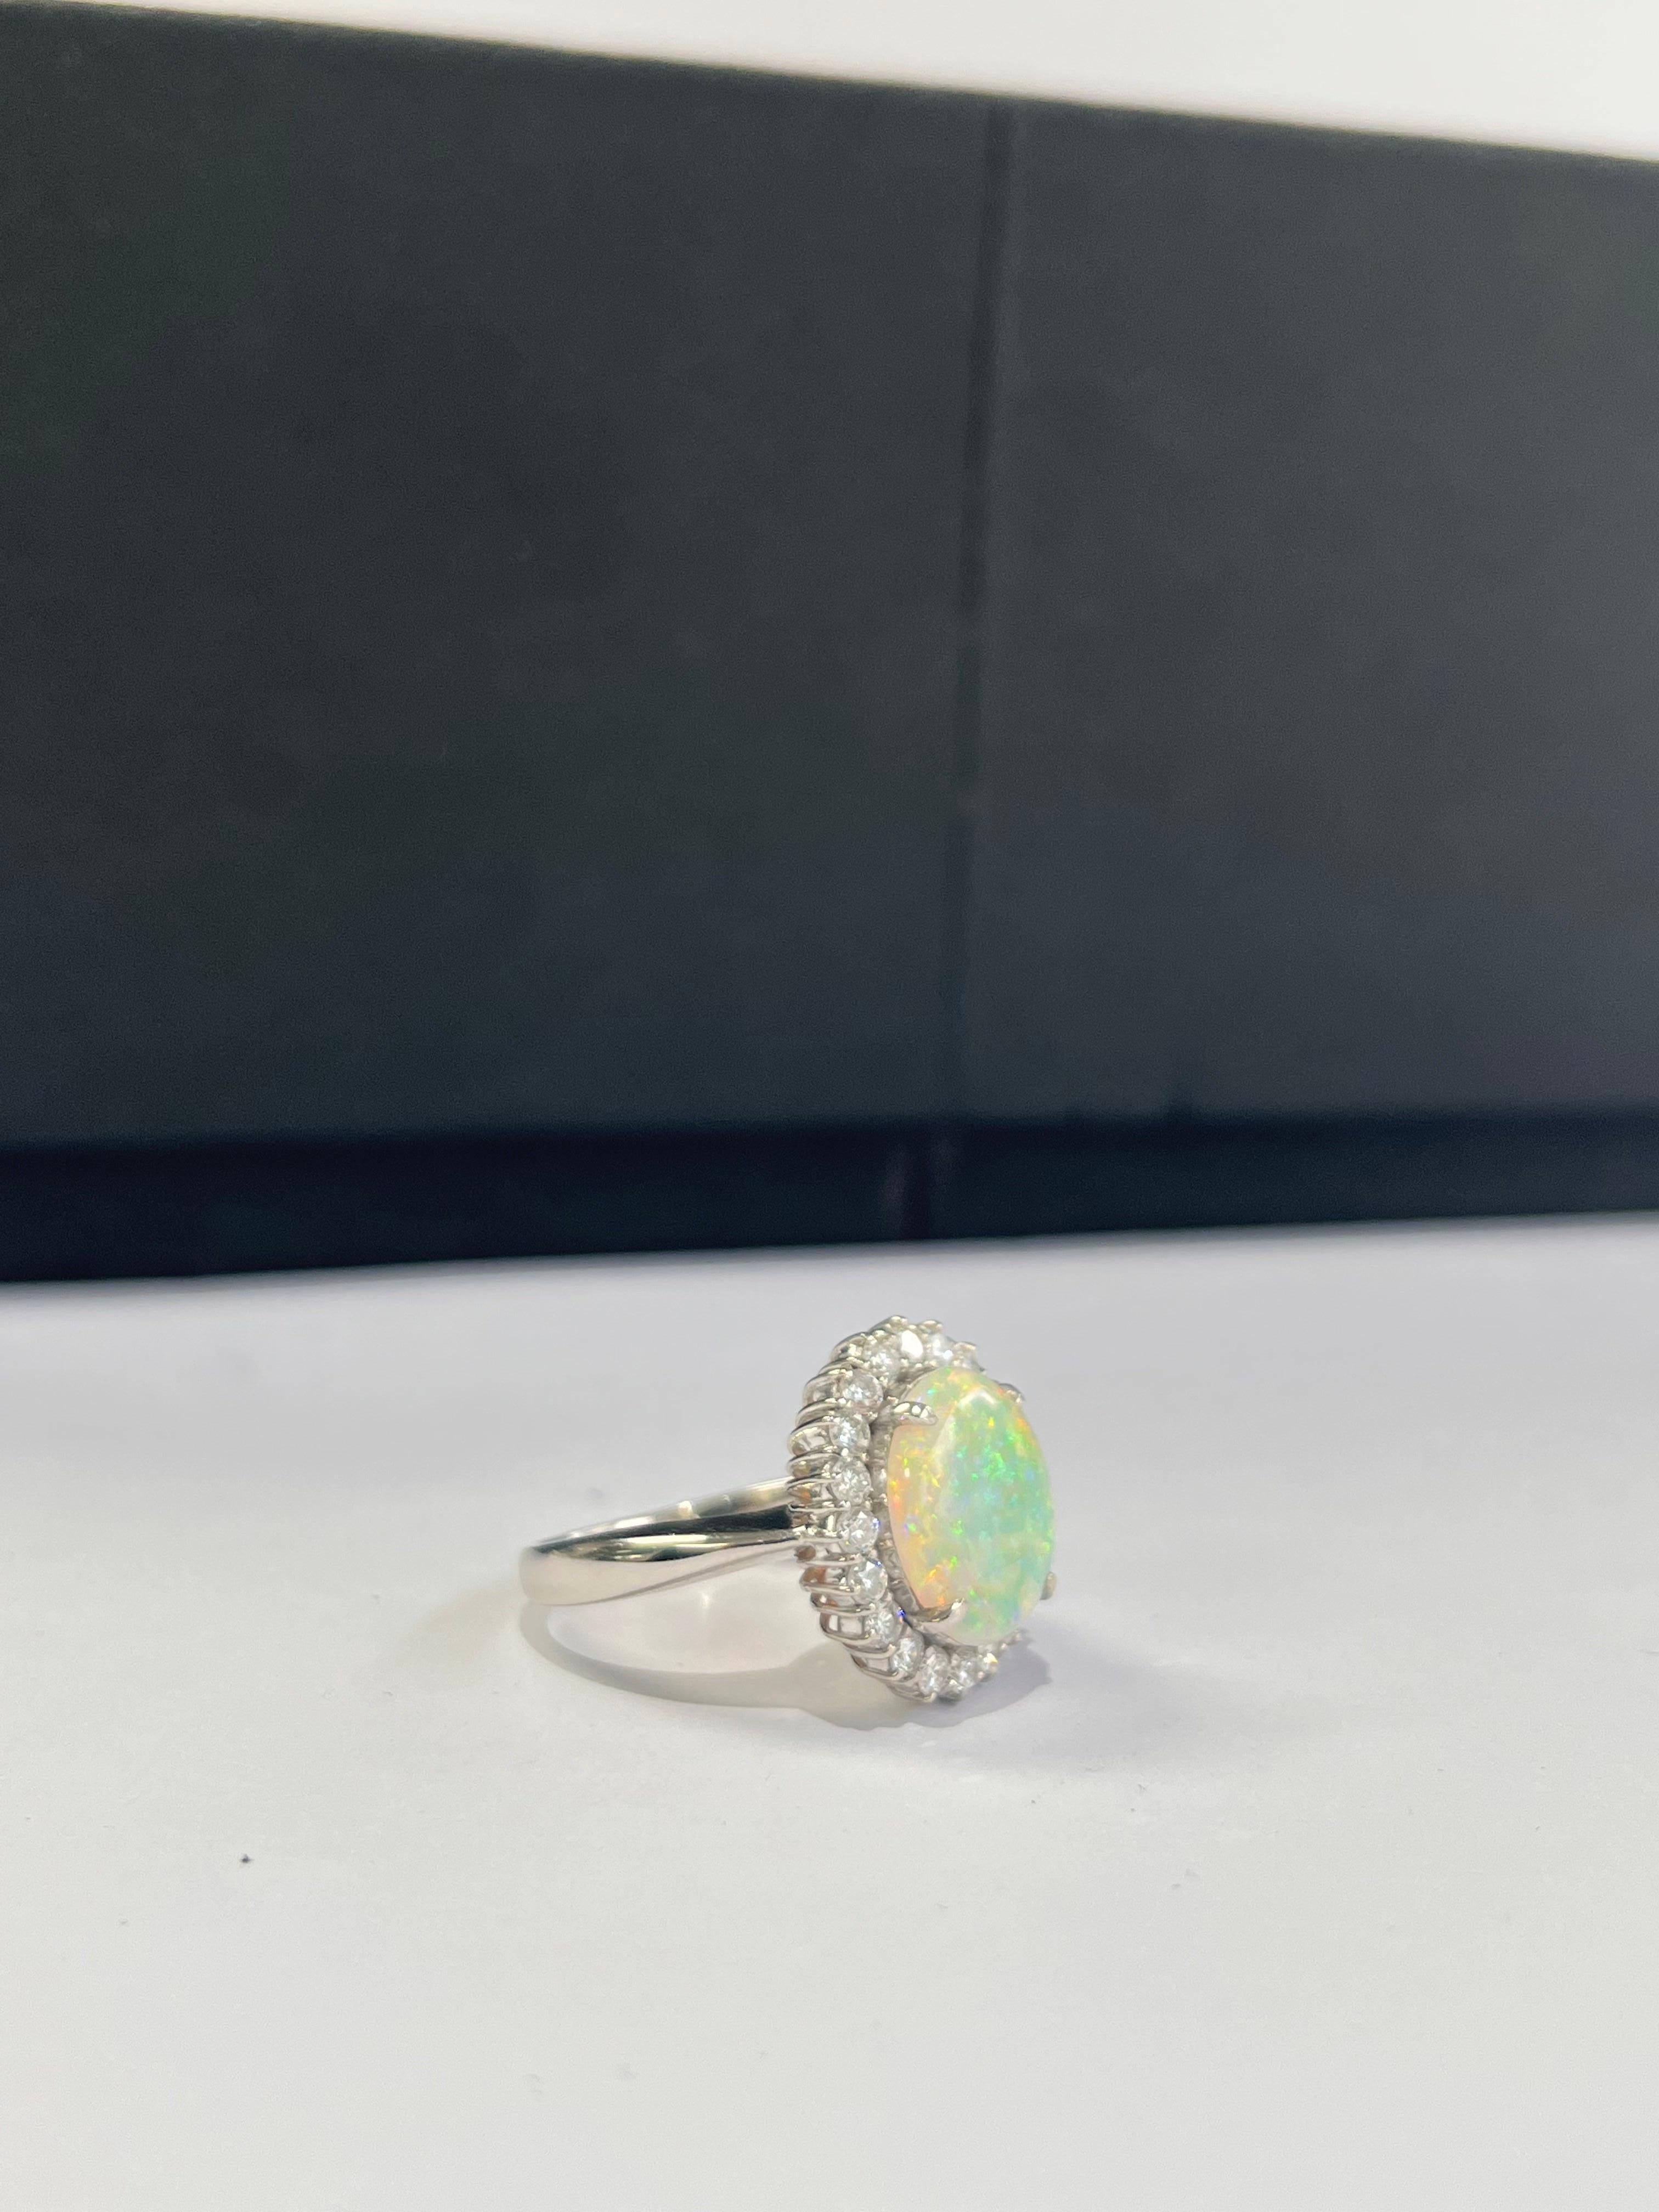 A very beautiful and wearable Opal Engagement Ring set in Platinum 900 and Diamonds. The weight of the Opal is 2.51 carats. The Opal is of Australian origin. The weight of the Diamonds is 0.71 carats. Net Platinum weight is 7.756 grams. The